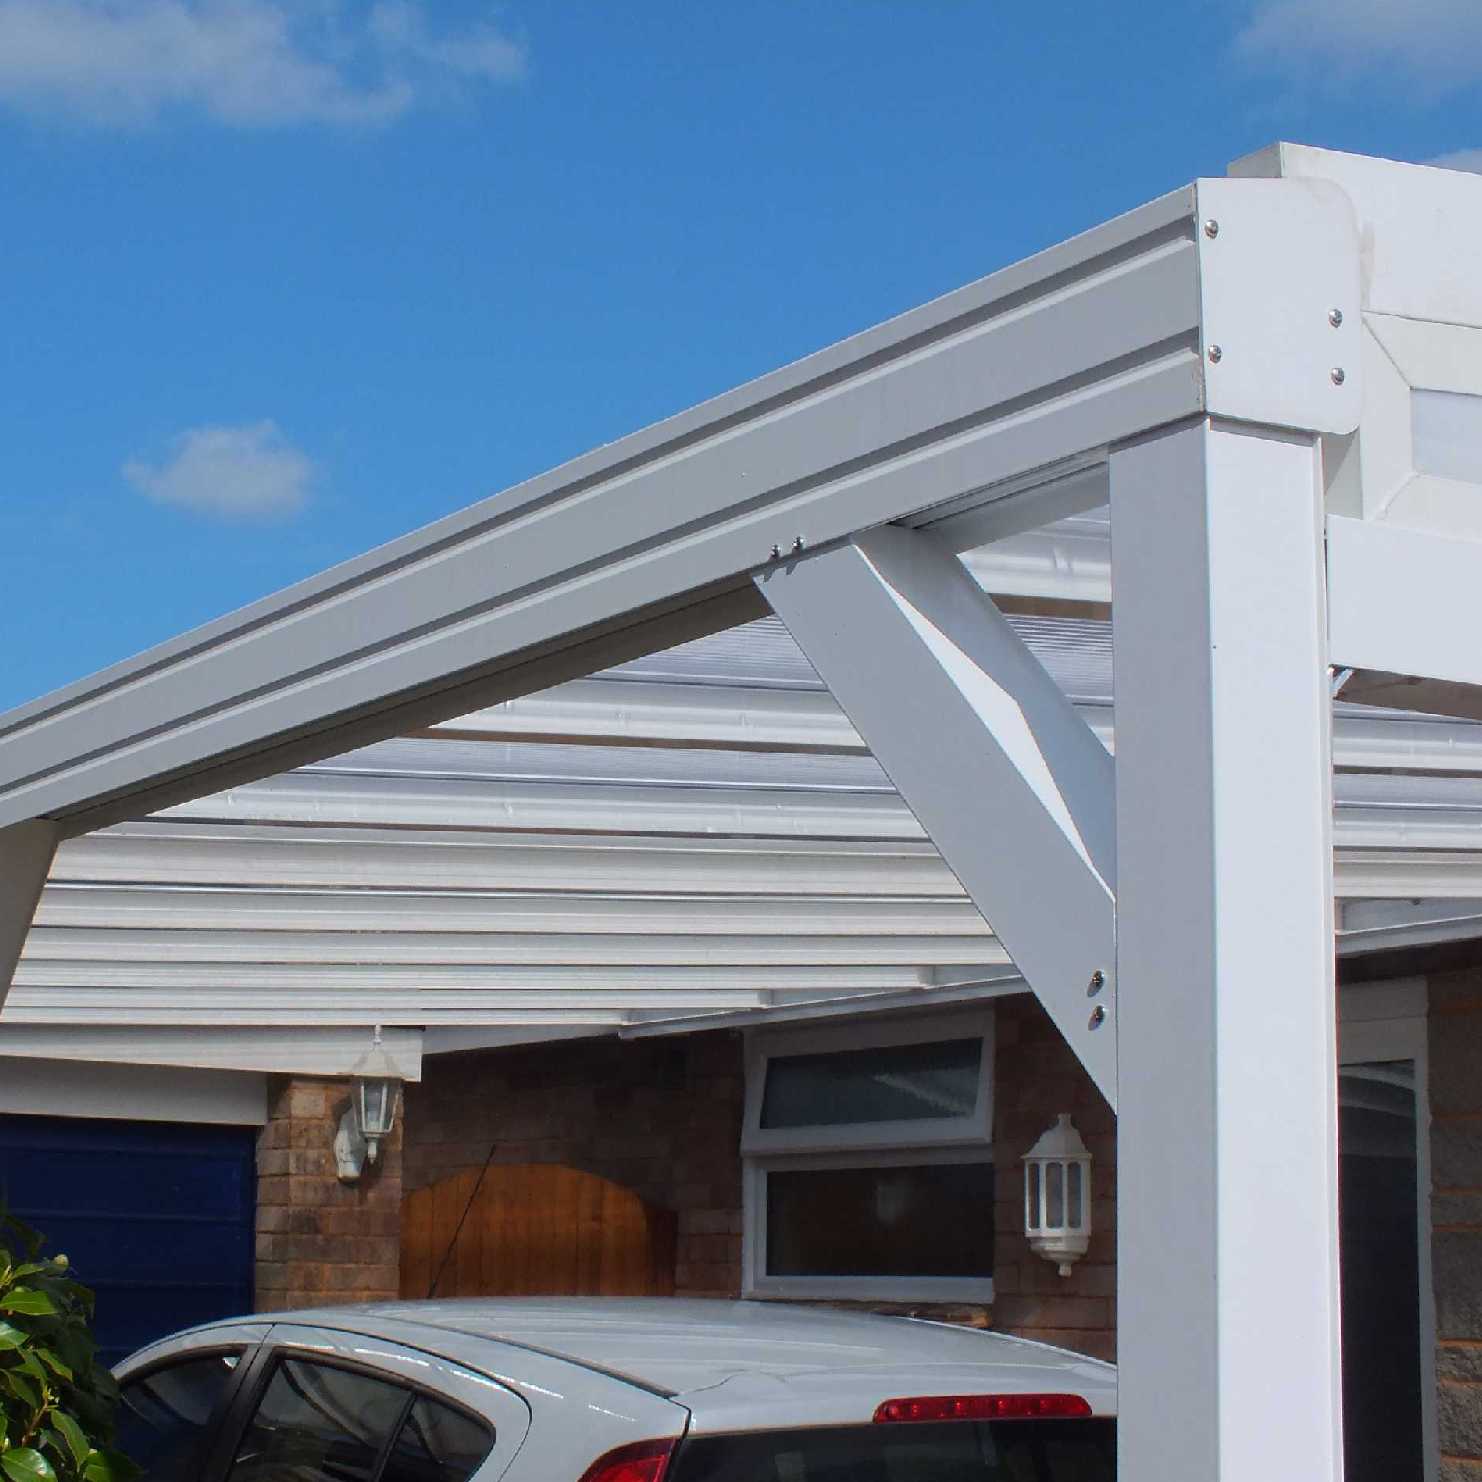 Buy Omega Smart Lean-To Canopy, White with 16mm Polycarbonate Glazing - 7.4m (W) x 2.0m (P), (4) Supporting Posts online today